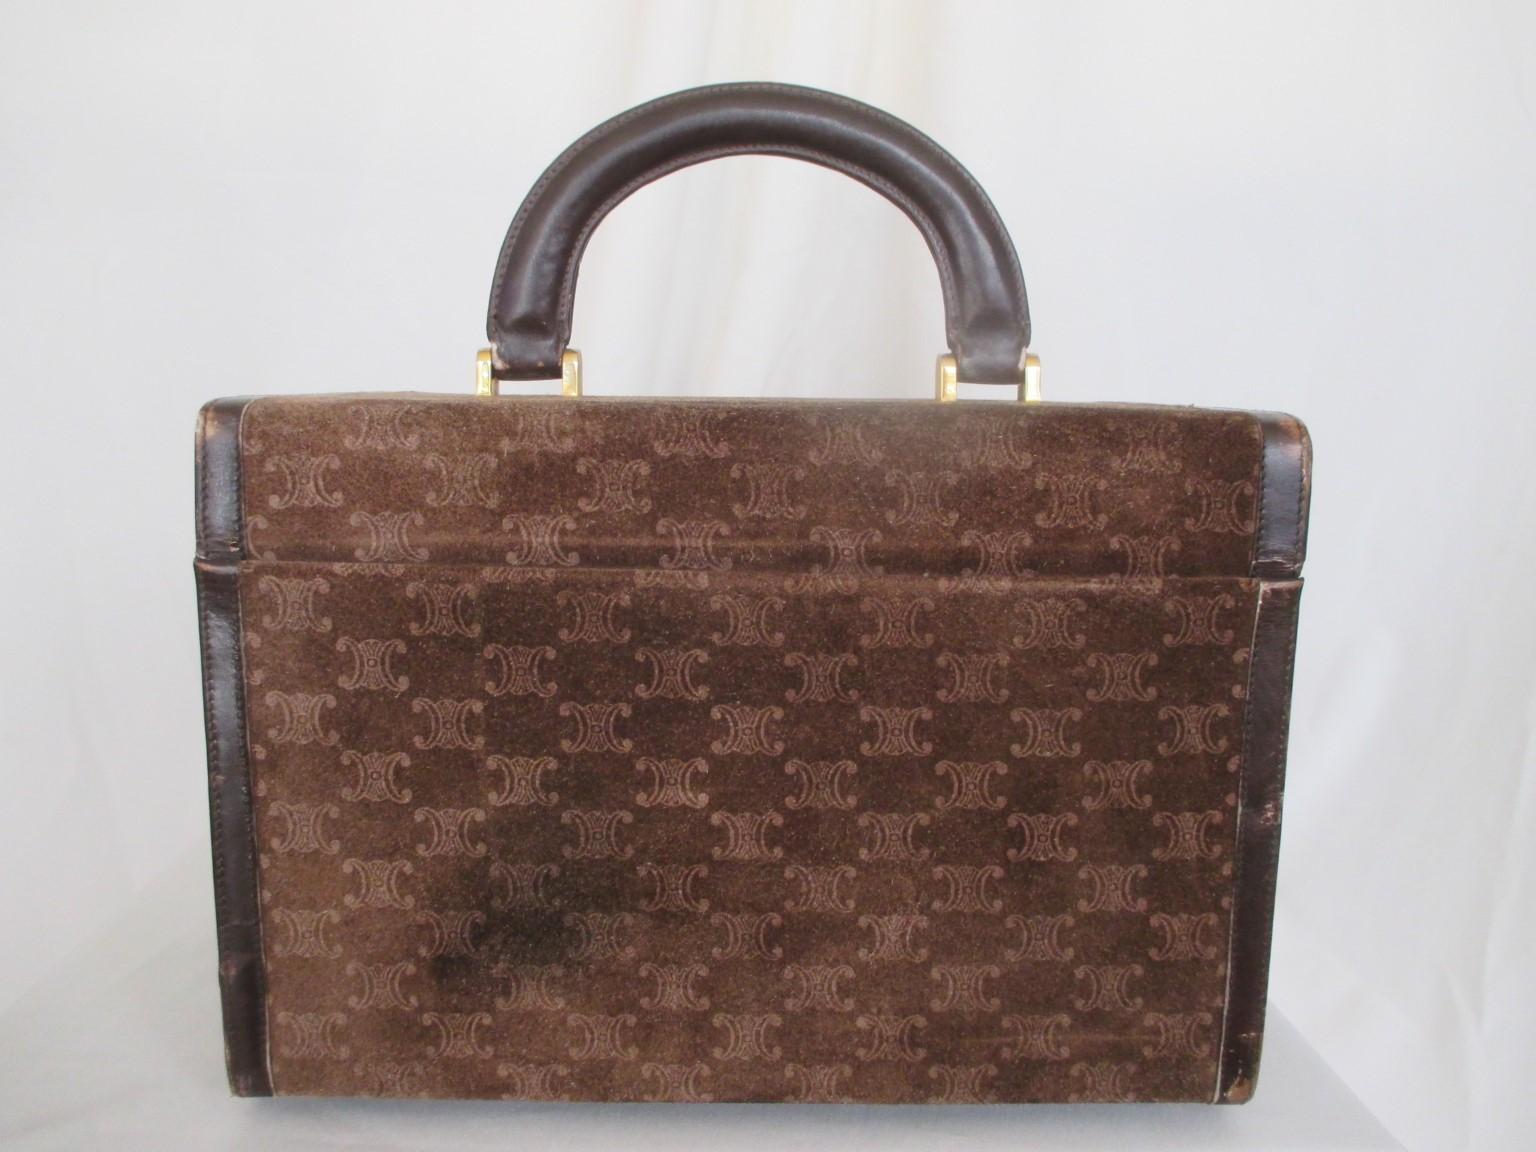 Celine authentic vintage cosmetic traveling case

View our frontstore for more exclusive items

Details:
Rare Celine vanity case from circa 70s.
In leather and dark brown suede with embossed macadam monogram logo.
With lock (no key) at the front and